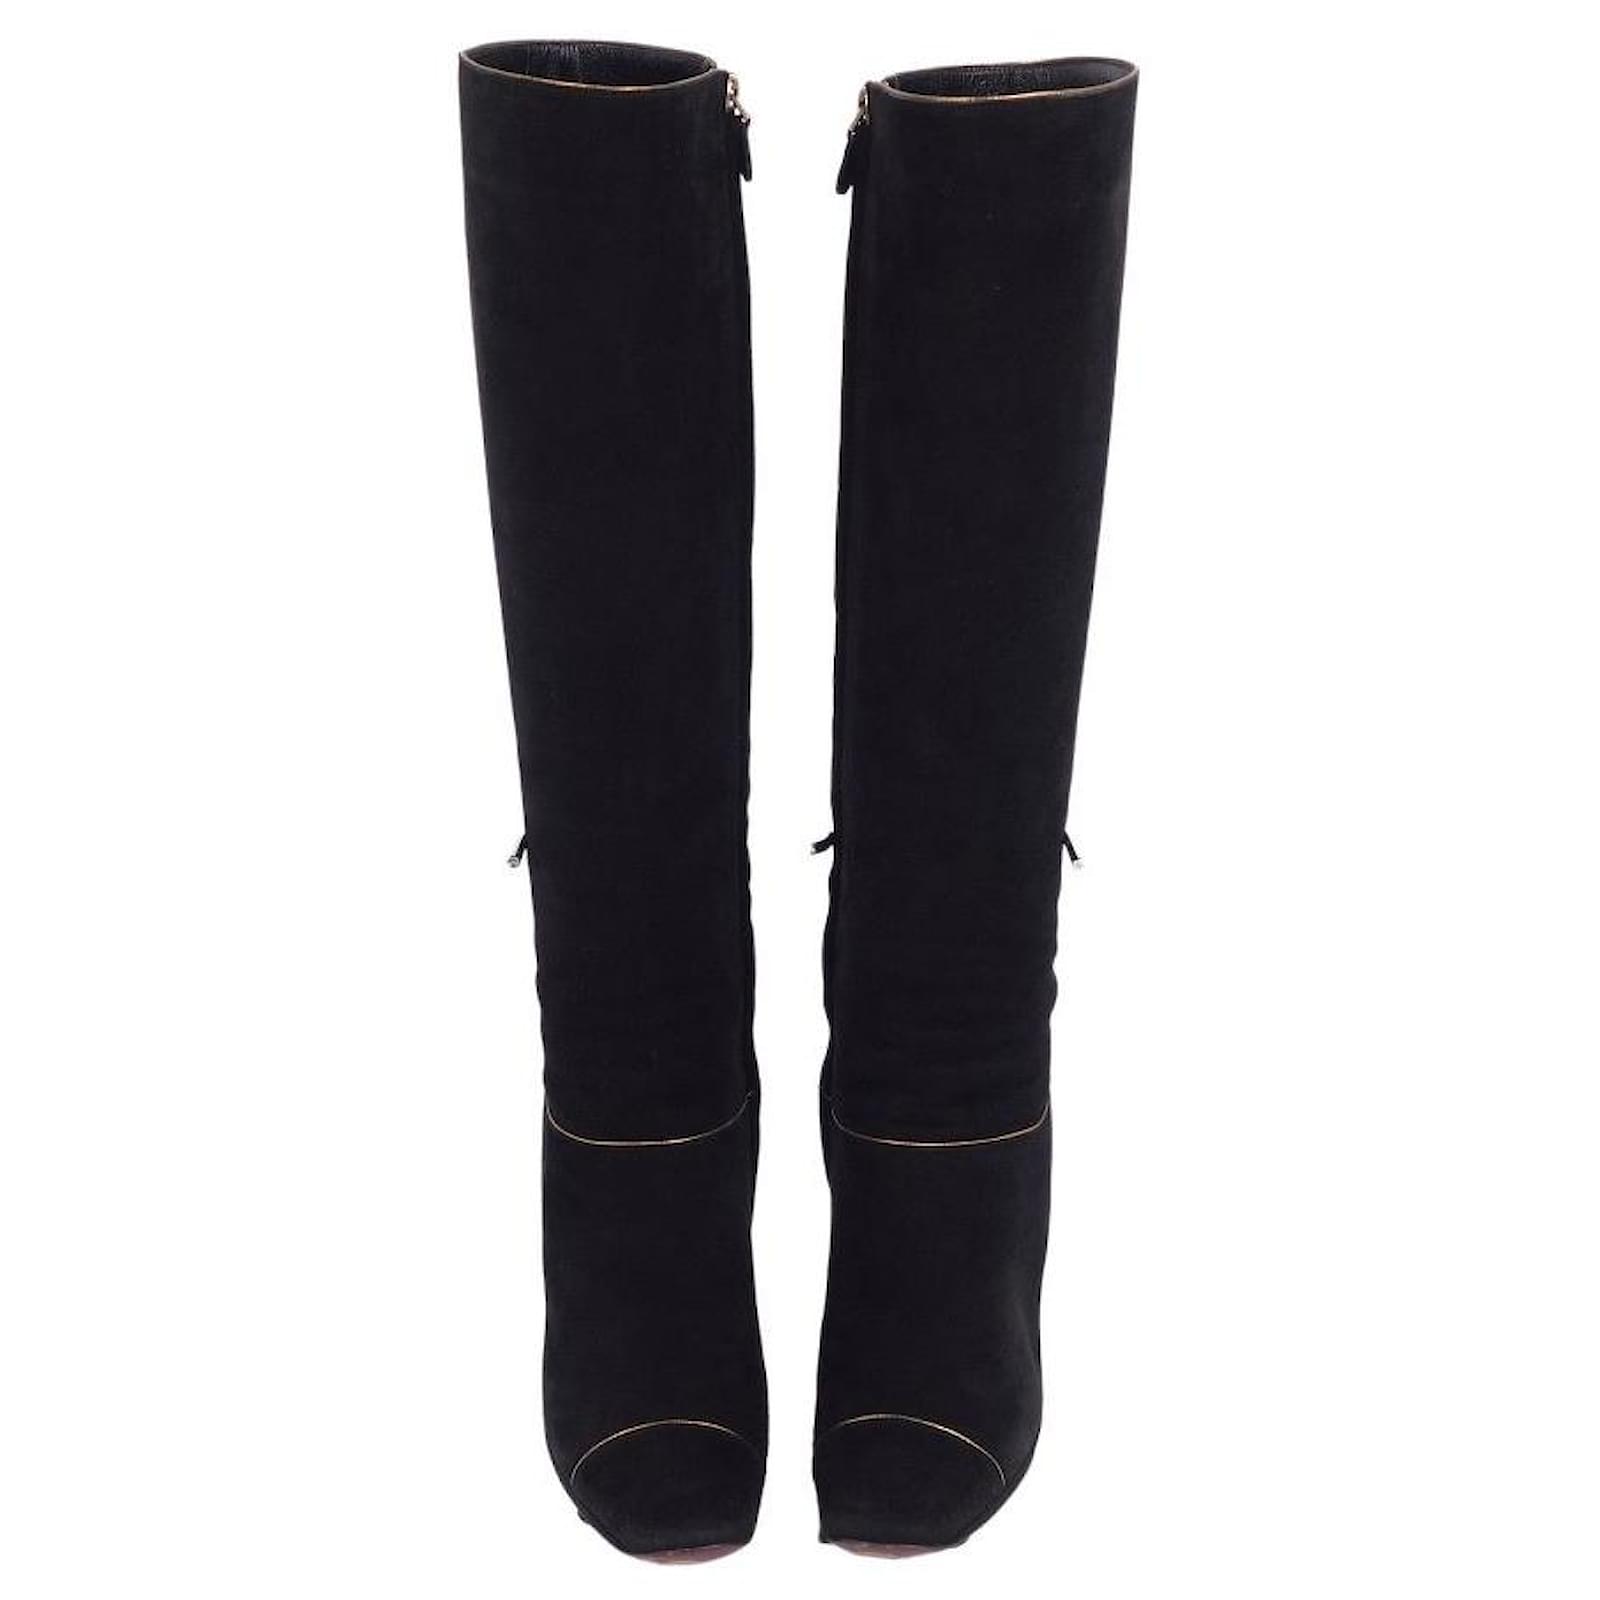 Louis Vuitton Leather Knee High Boots in Black size 36.5 Preowned